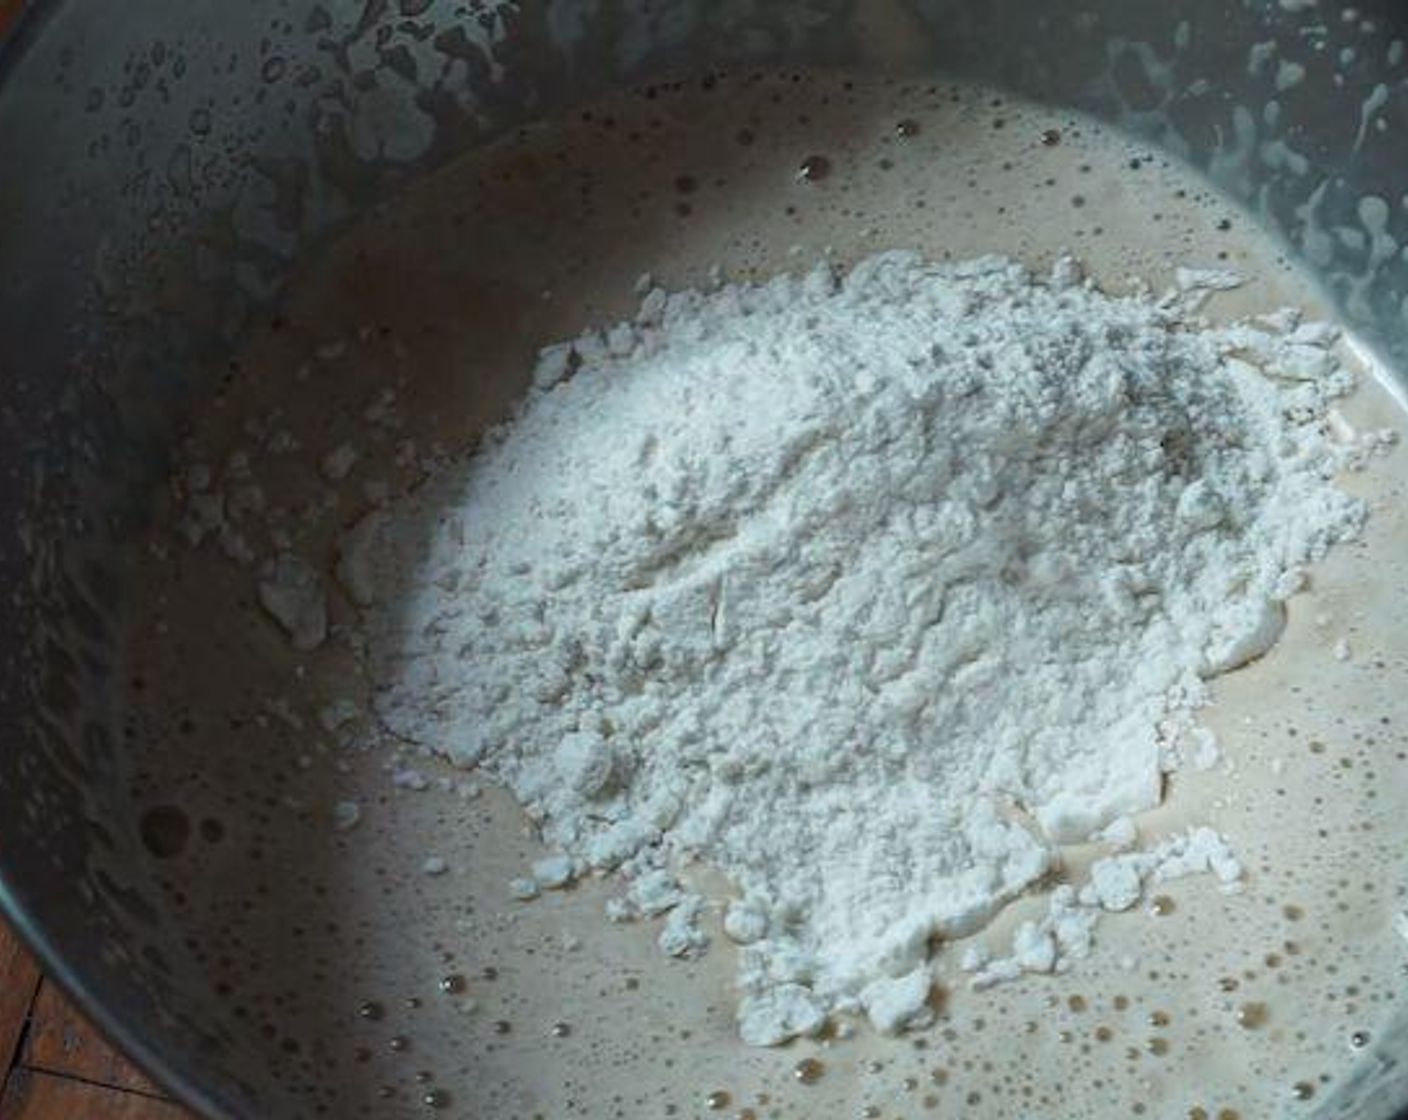 step 3 Stir in the Cake Flour (3/4 cup) and Baking Powder (1 1/4 tsp).